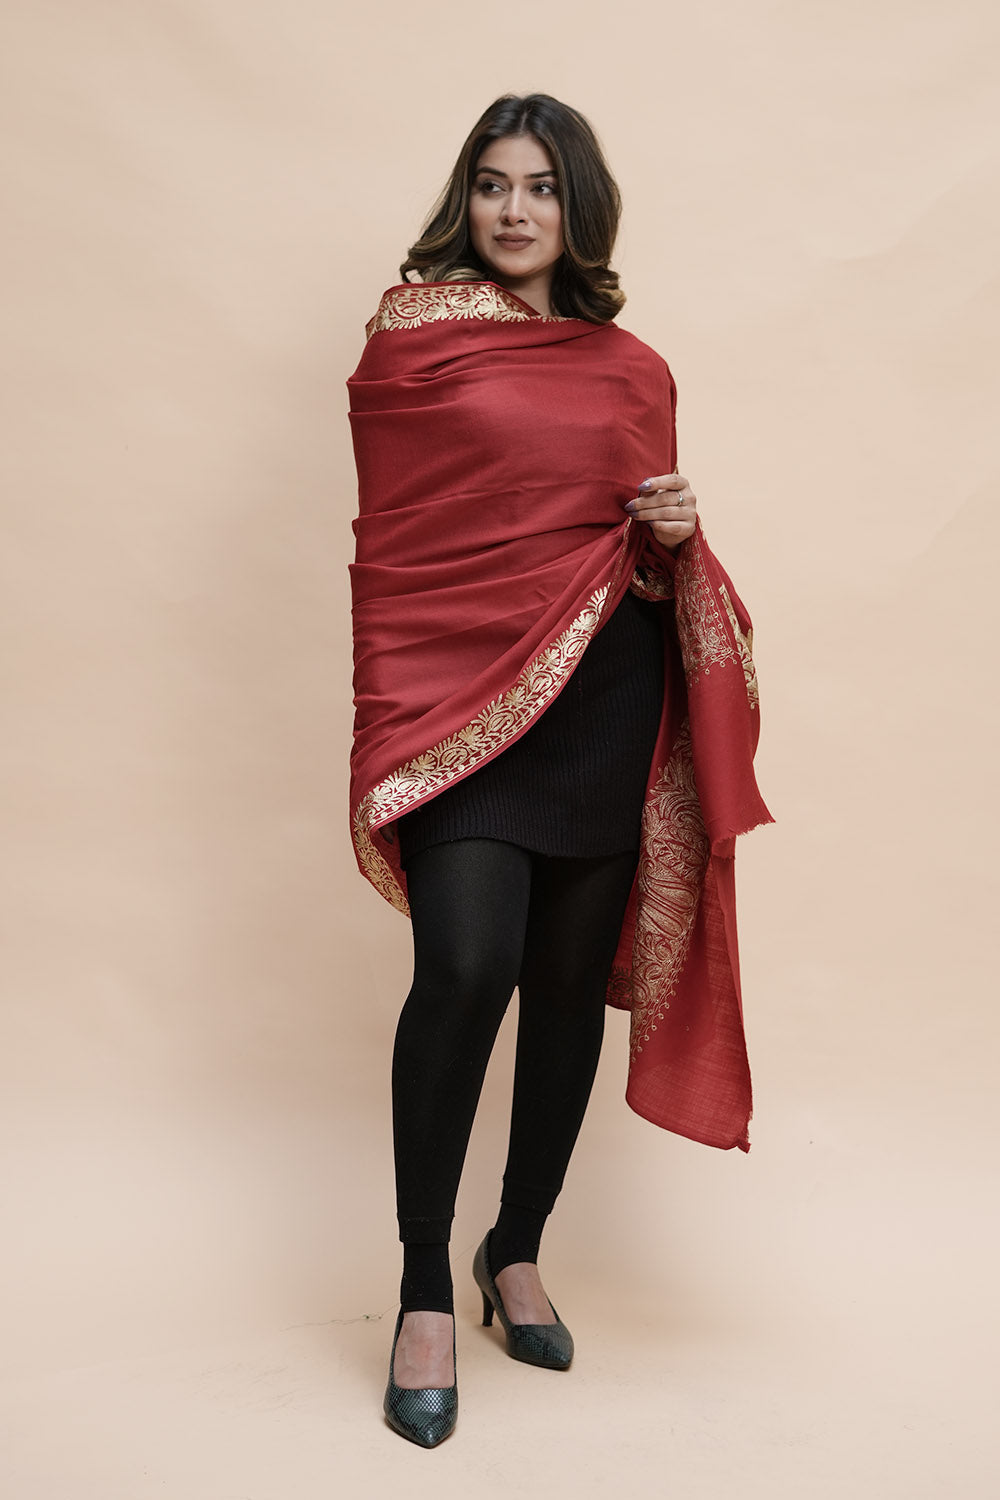 Maroon Colour Semi Pashmina Shawl Enriched With Ethnic